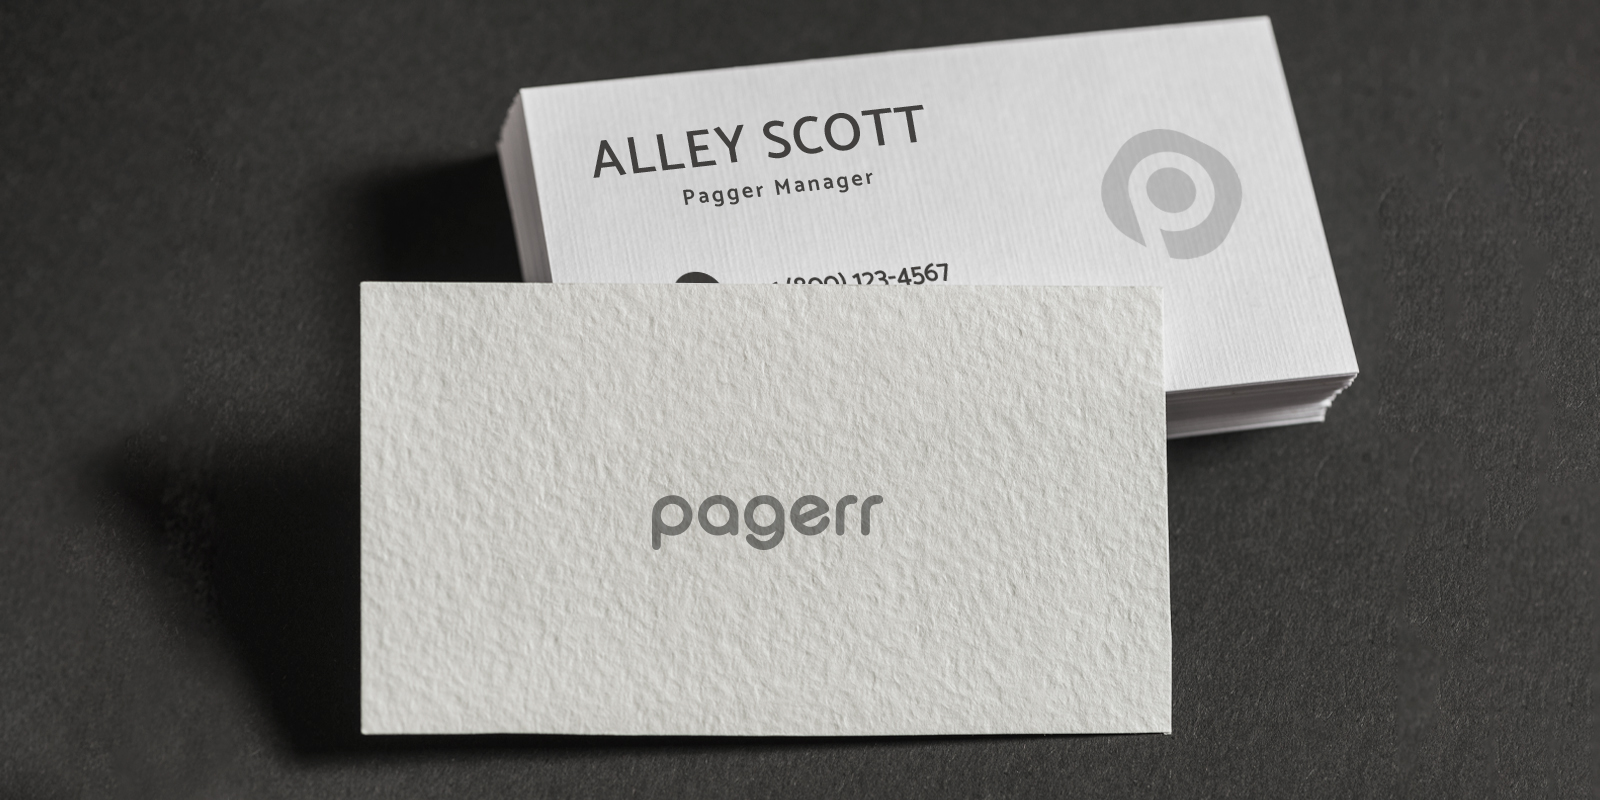 Special material business cards in Paris - Print with Pagerr